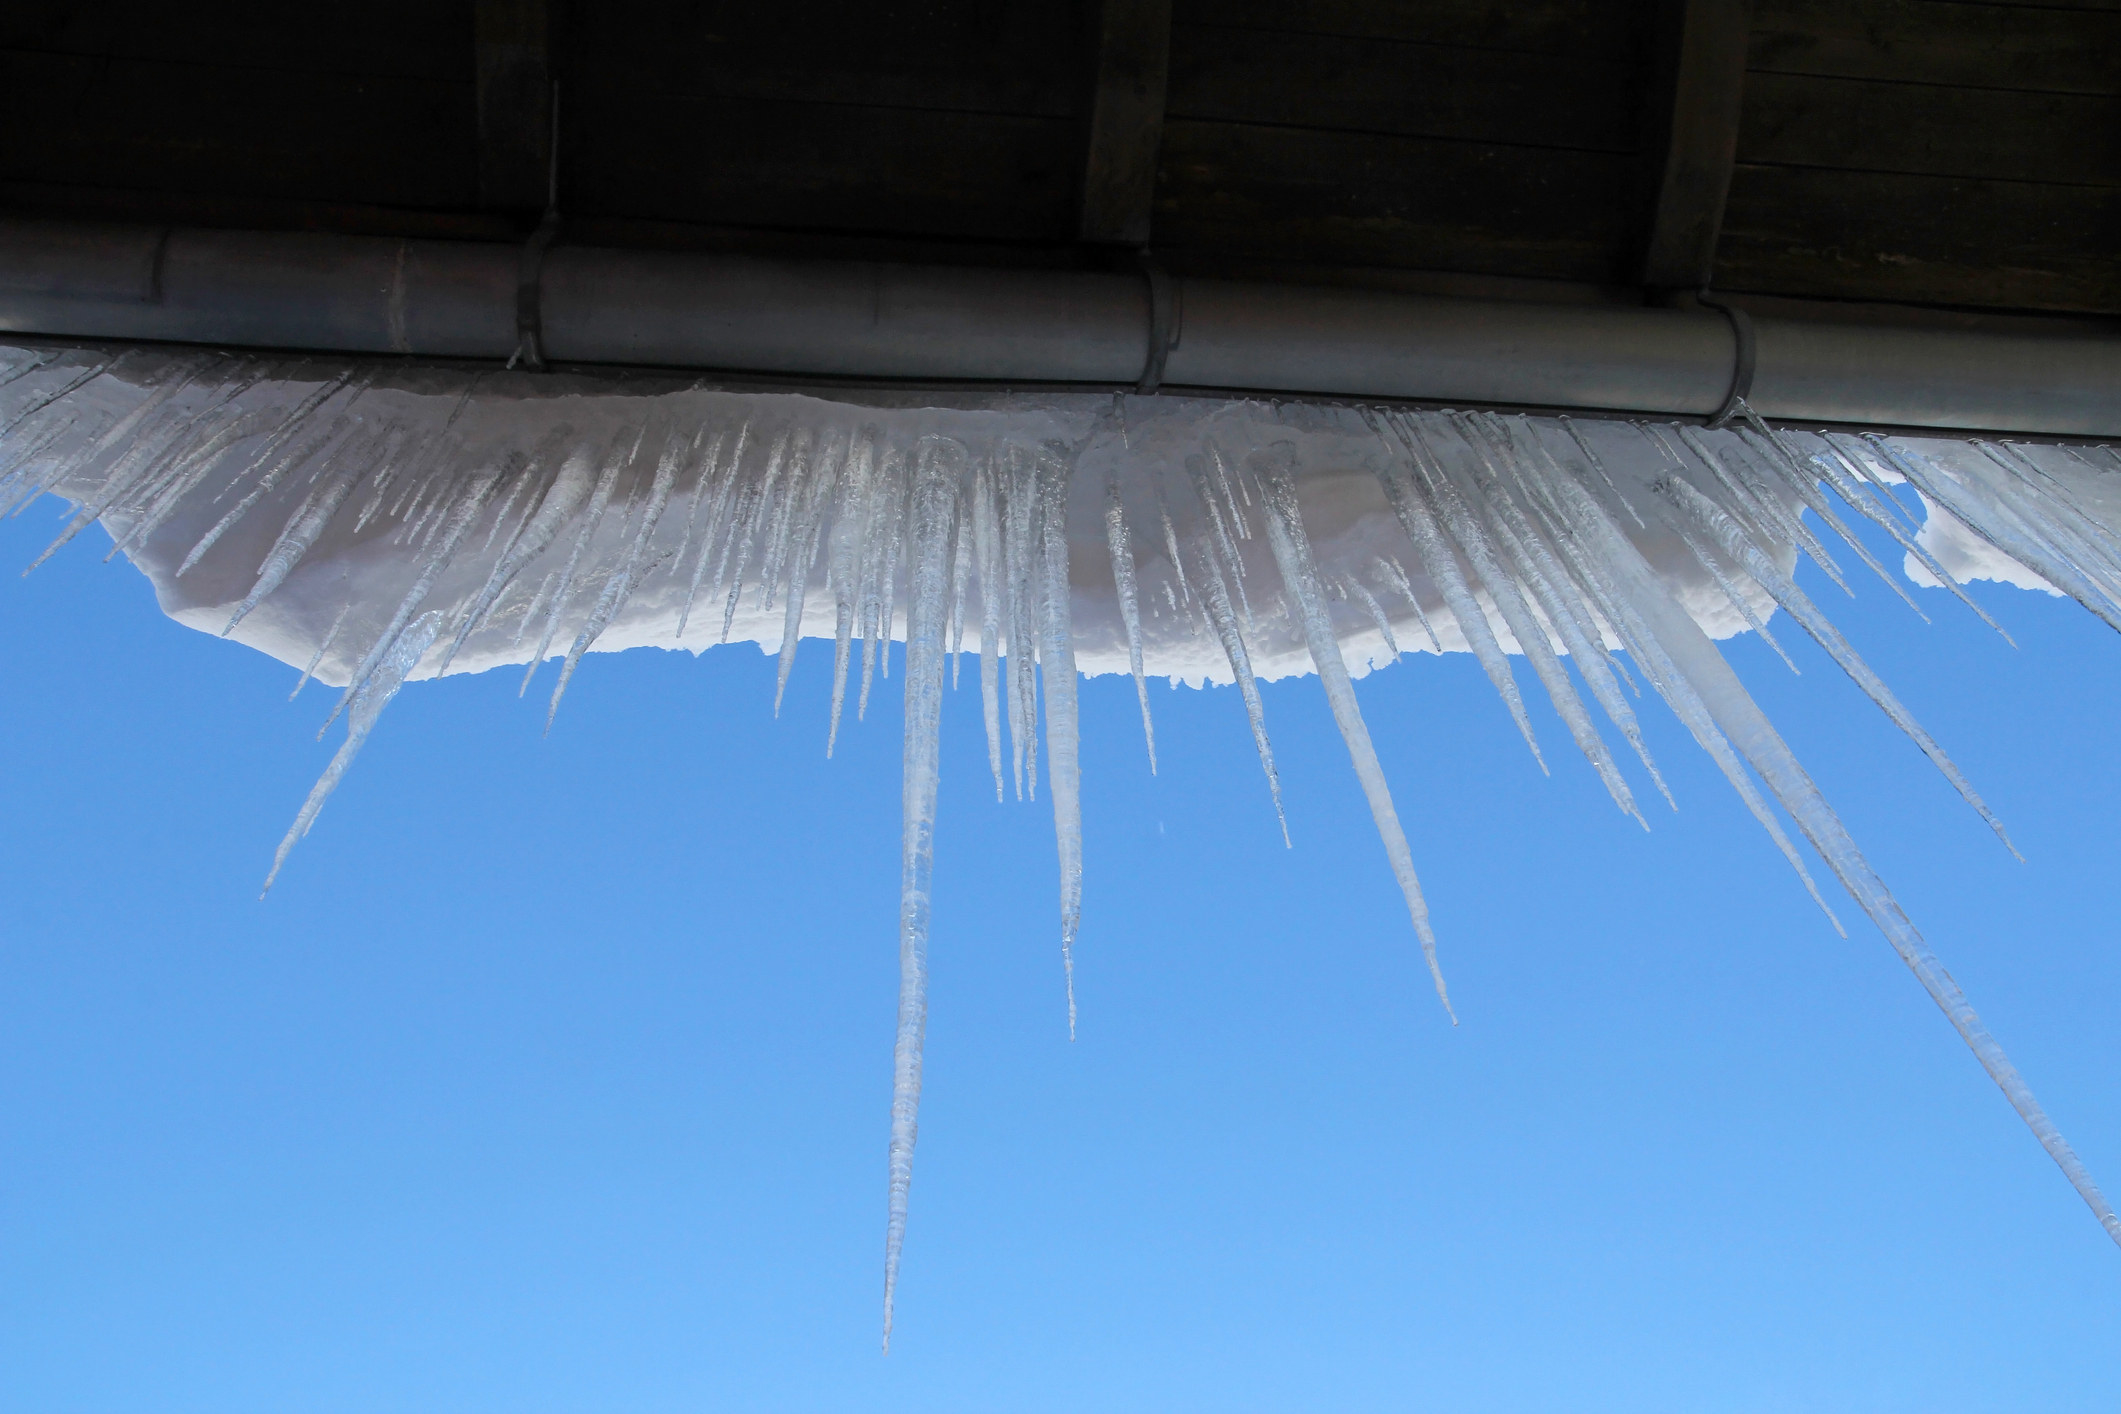 Giant icicles